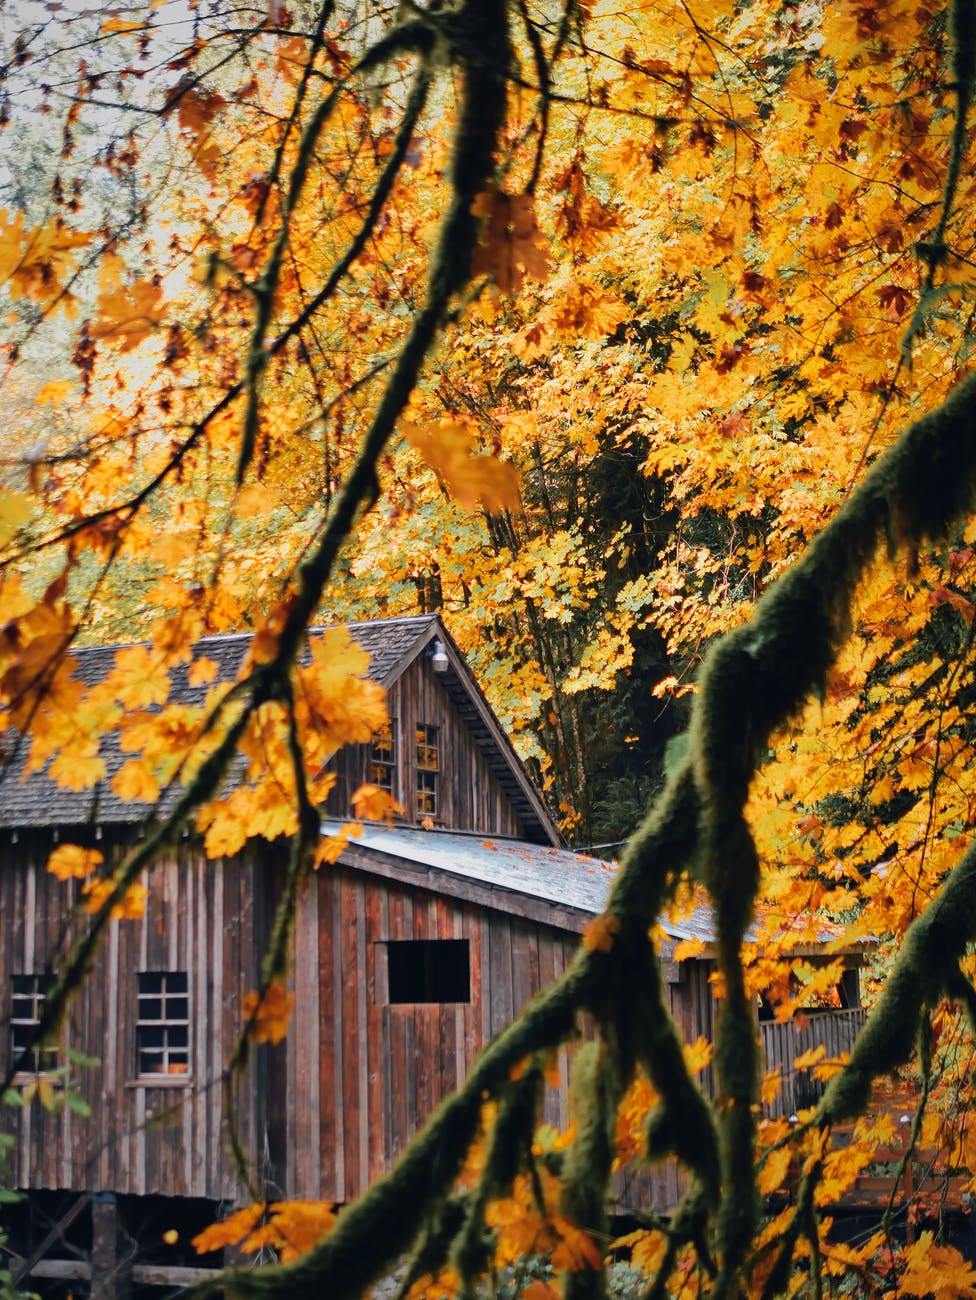 aged wooden house in autumn countryside